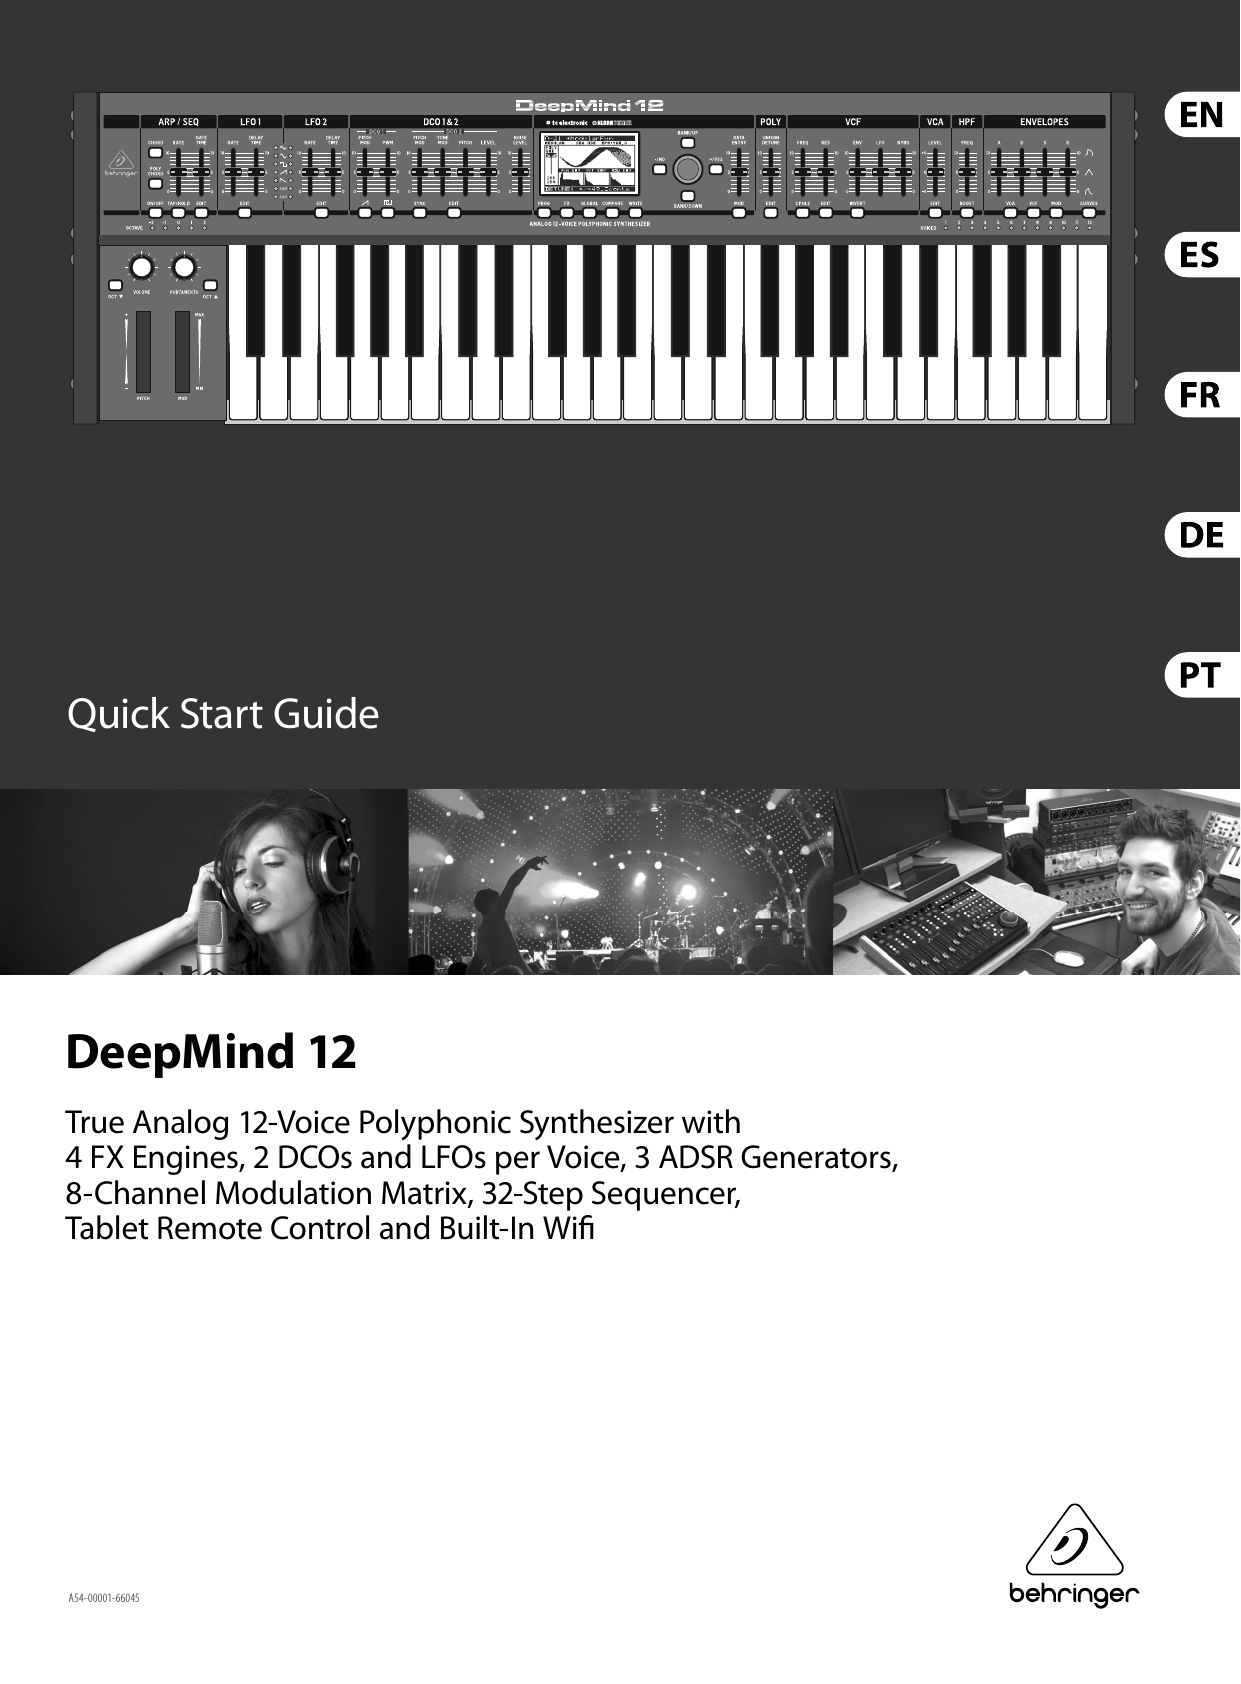 Quick Start GuideDeepMind 12True Analog 12-Voice Polyphonic Synthesizer with 4 FX Engines, 2 DCOs and LFOs per Voice, 3 ADSR Generators, 8-Channel Modulation Matrix, 32-Step Sequencer, Tablet Remote Control and Built-In Wi A54-00001-66045